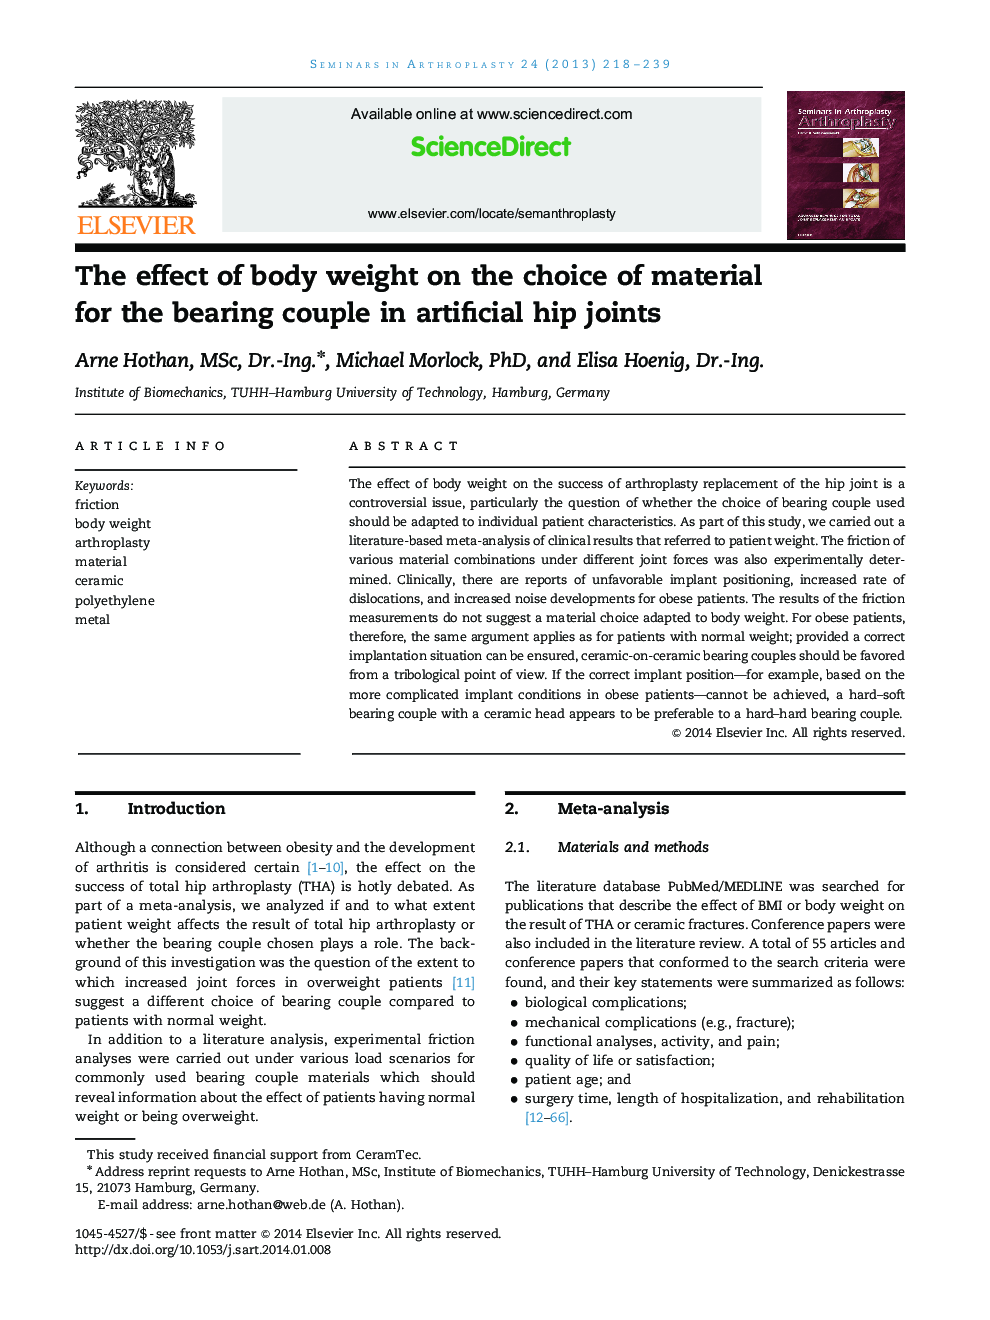 The effect of body weight on the choice of material for the bearing couple in artificial hip joints 